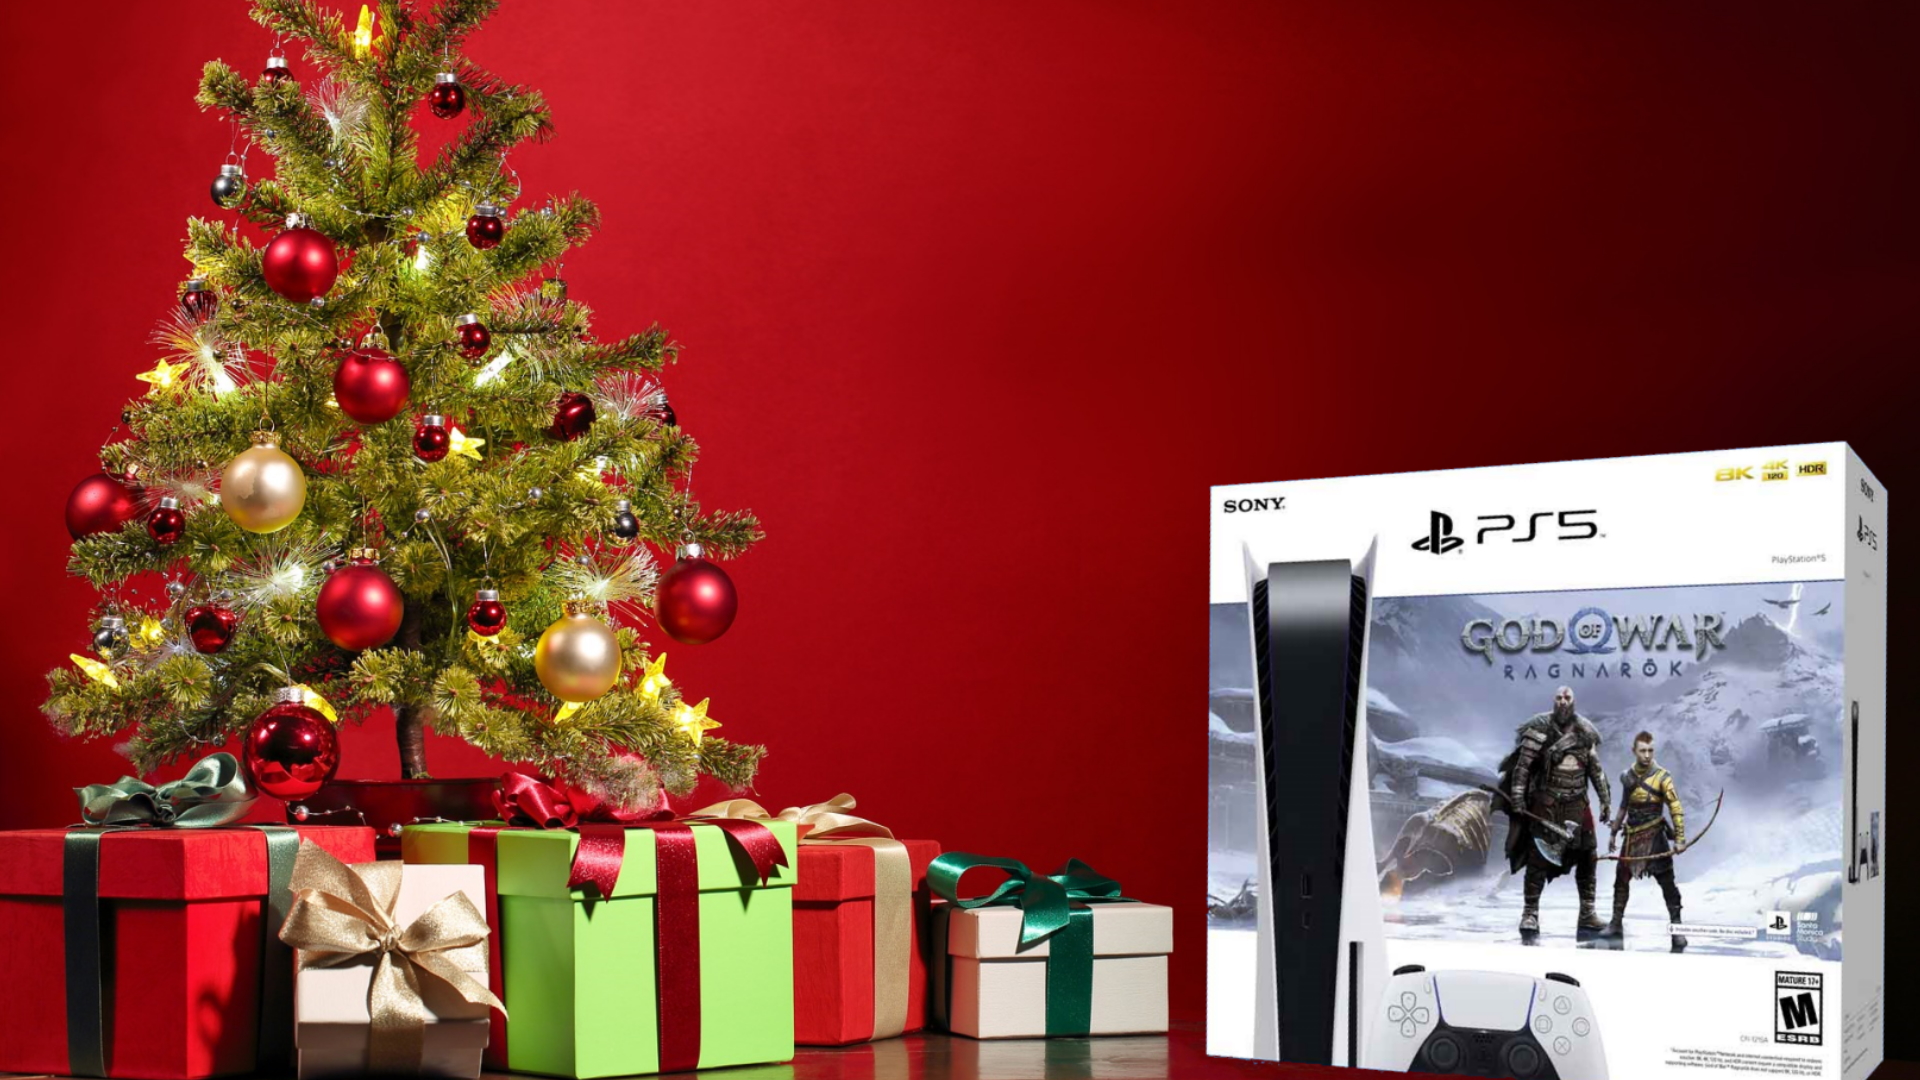 With these 5 methods you can still get a PS5 before Christmas